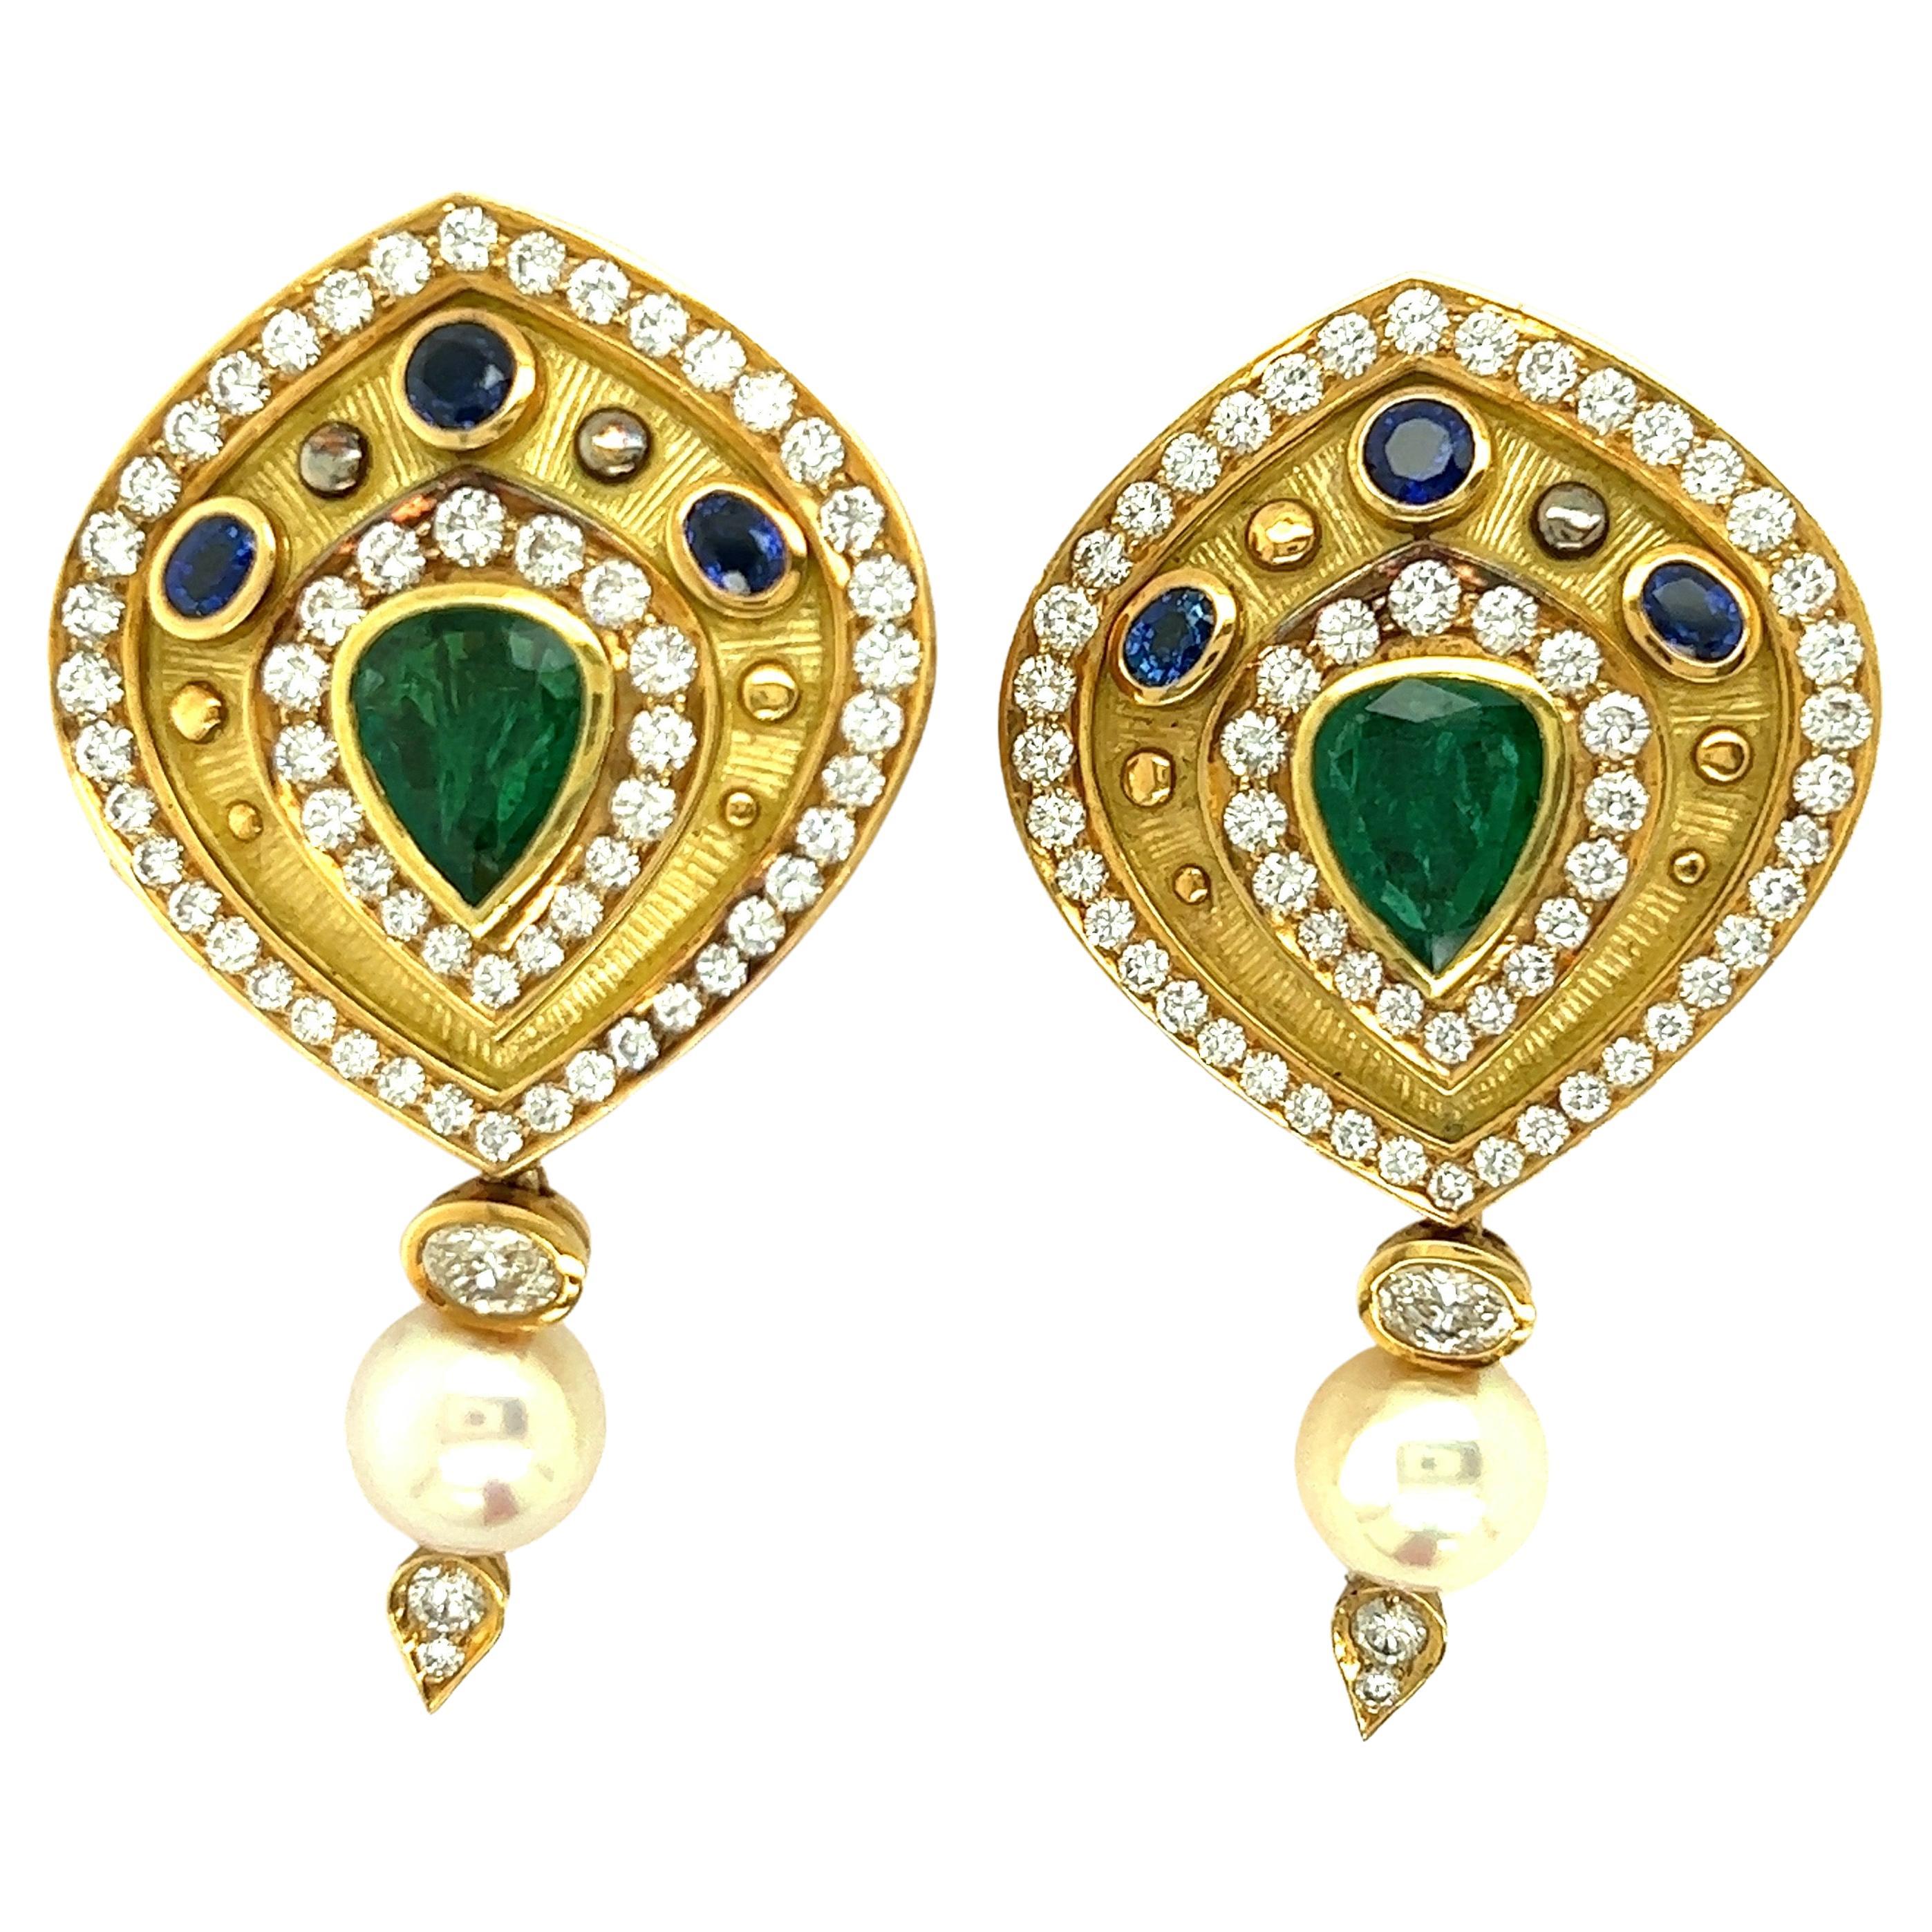 Pear Shaped Emerald, Diamond, and Sapphire 18k Yellow Gold Earrings